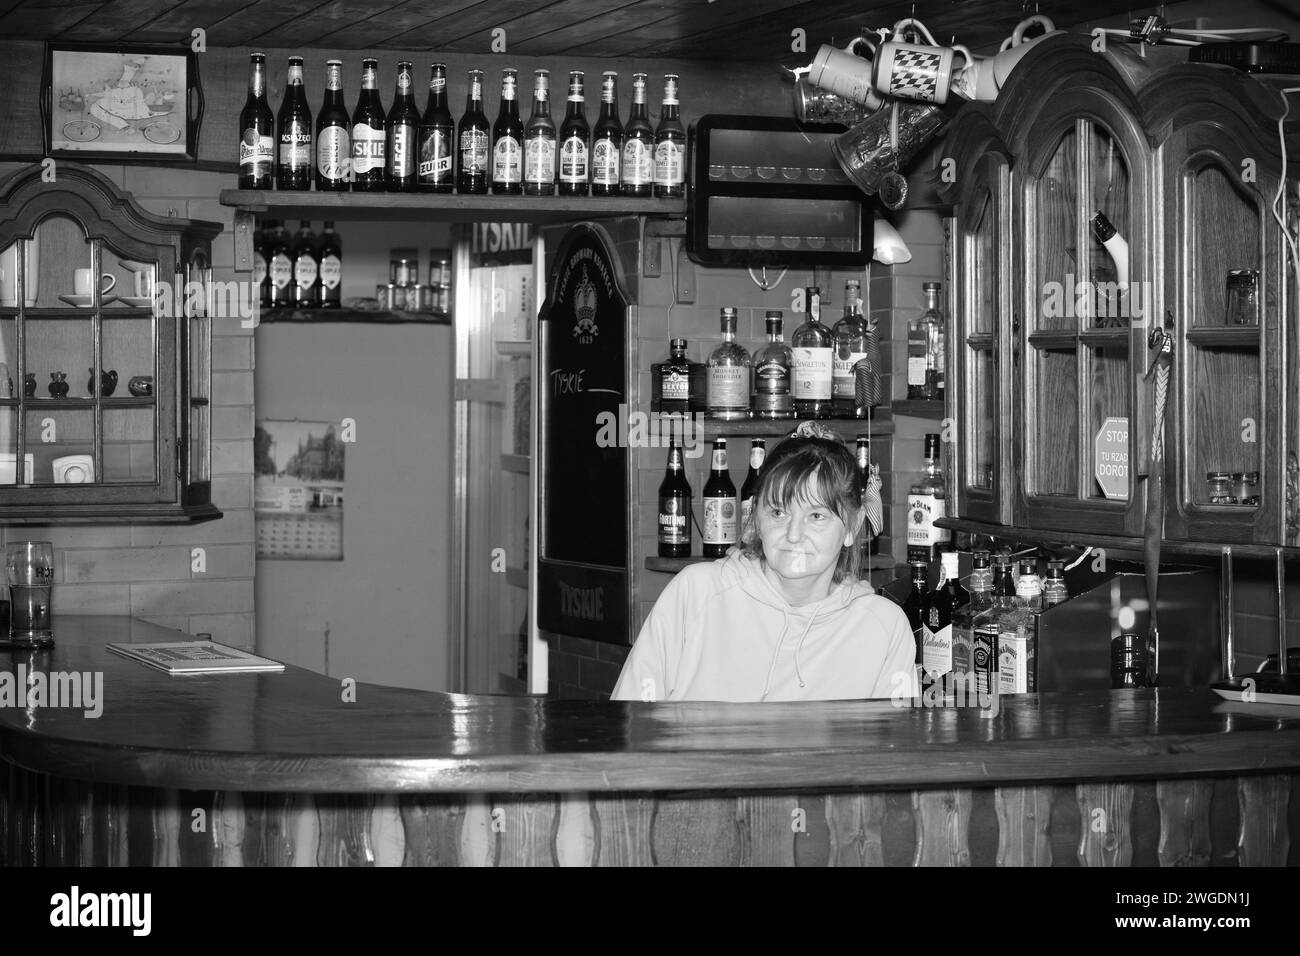 Lady Dorota, owner of a pub, local legend. Portrait of a mature woman. Barmaid.Gniezno, Poland. Stock Photo